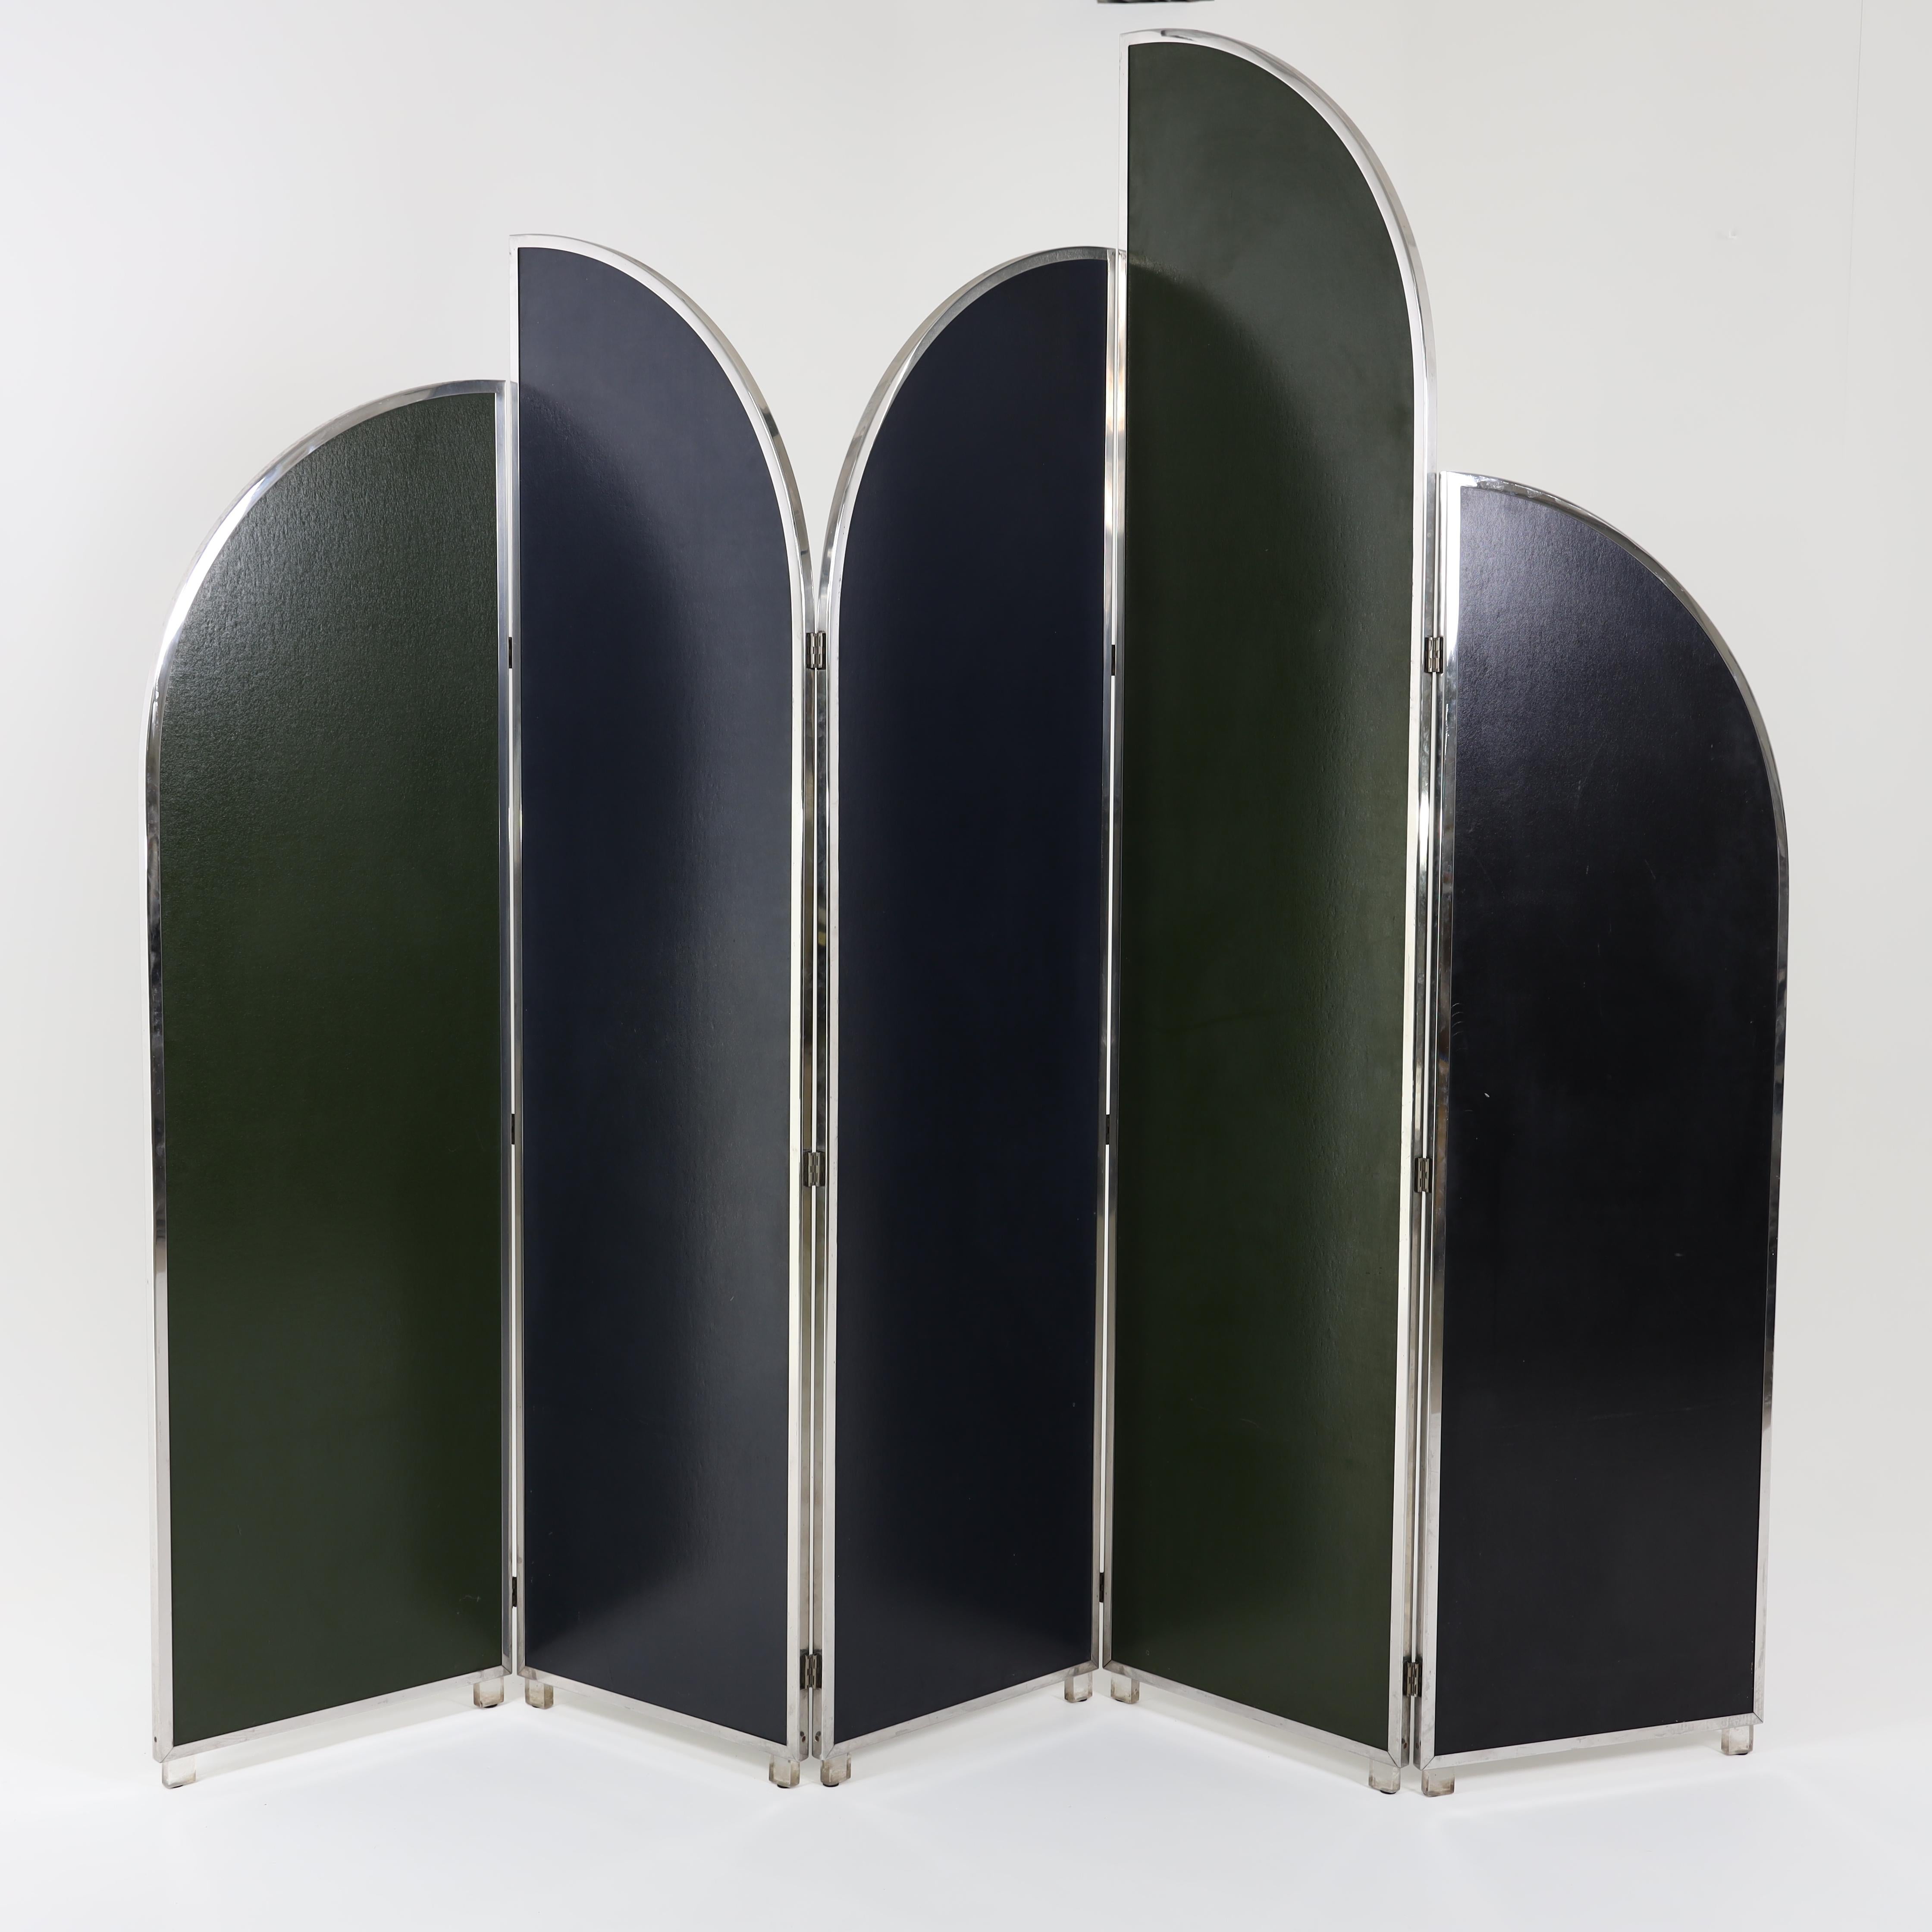 Colorful modernist folding screen by Sandro Petti.
Green and purple leather with a chrome frame and lucite feet.
Literature: Casa Vogue March 1974

Dimensions: Height 96 each panel width 21¾ total width of all panels; 108.75 inches.